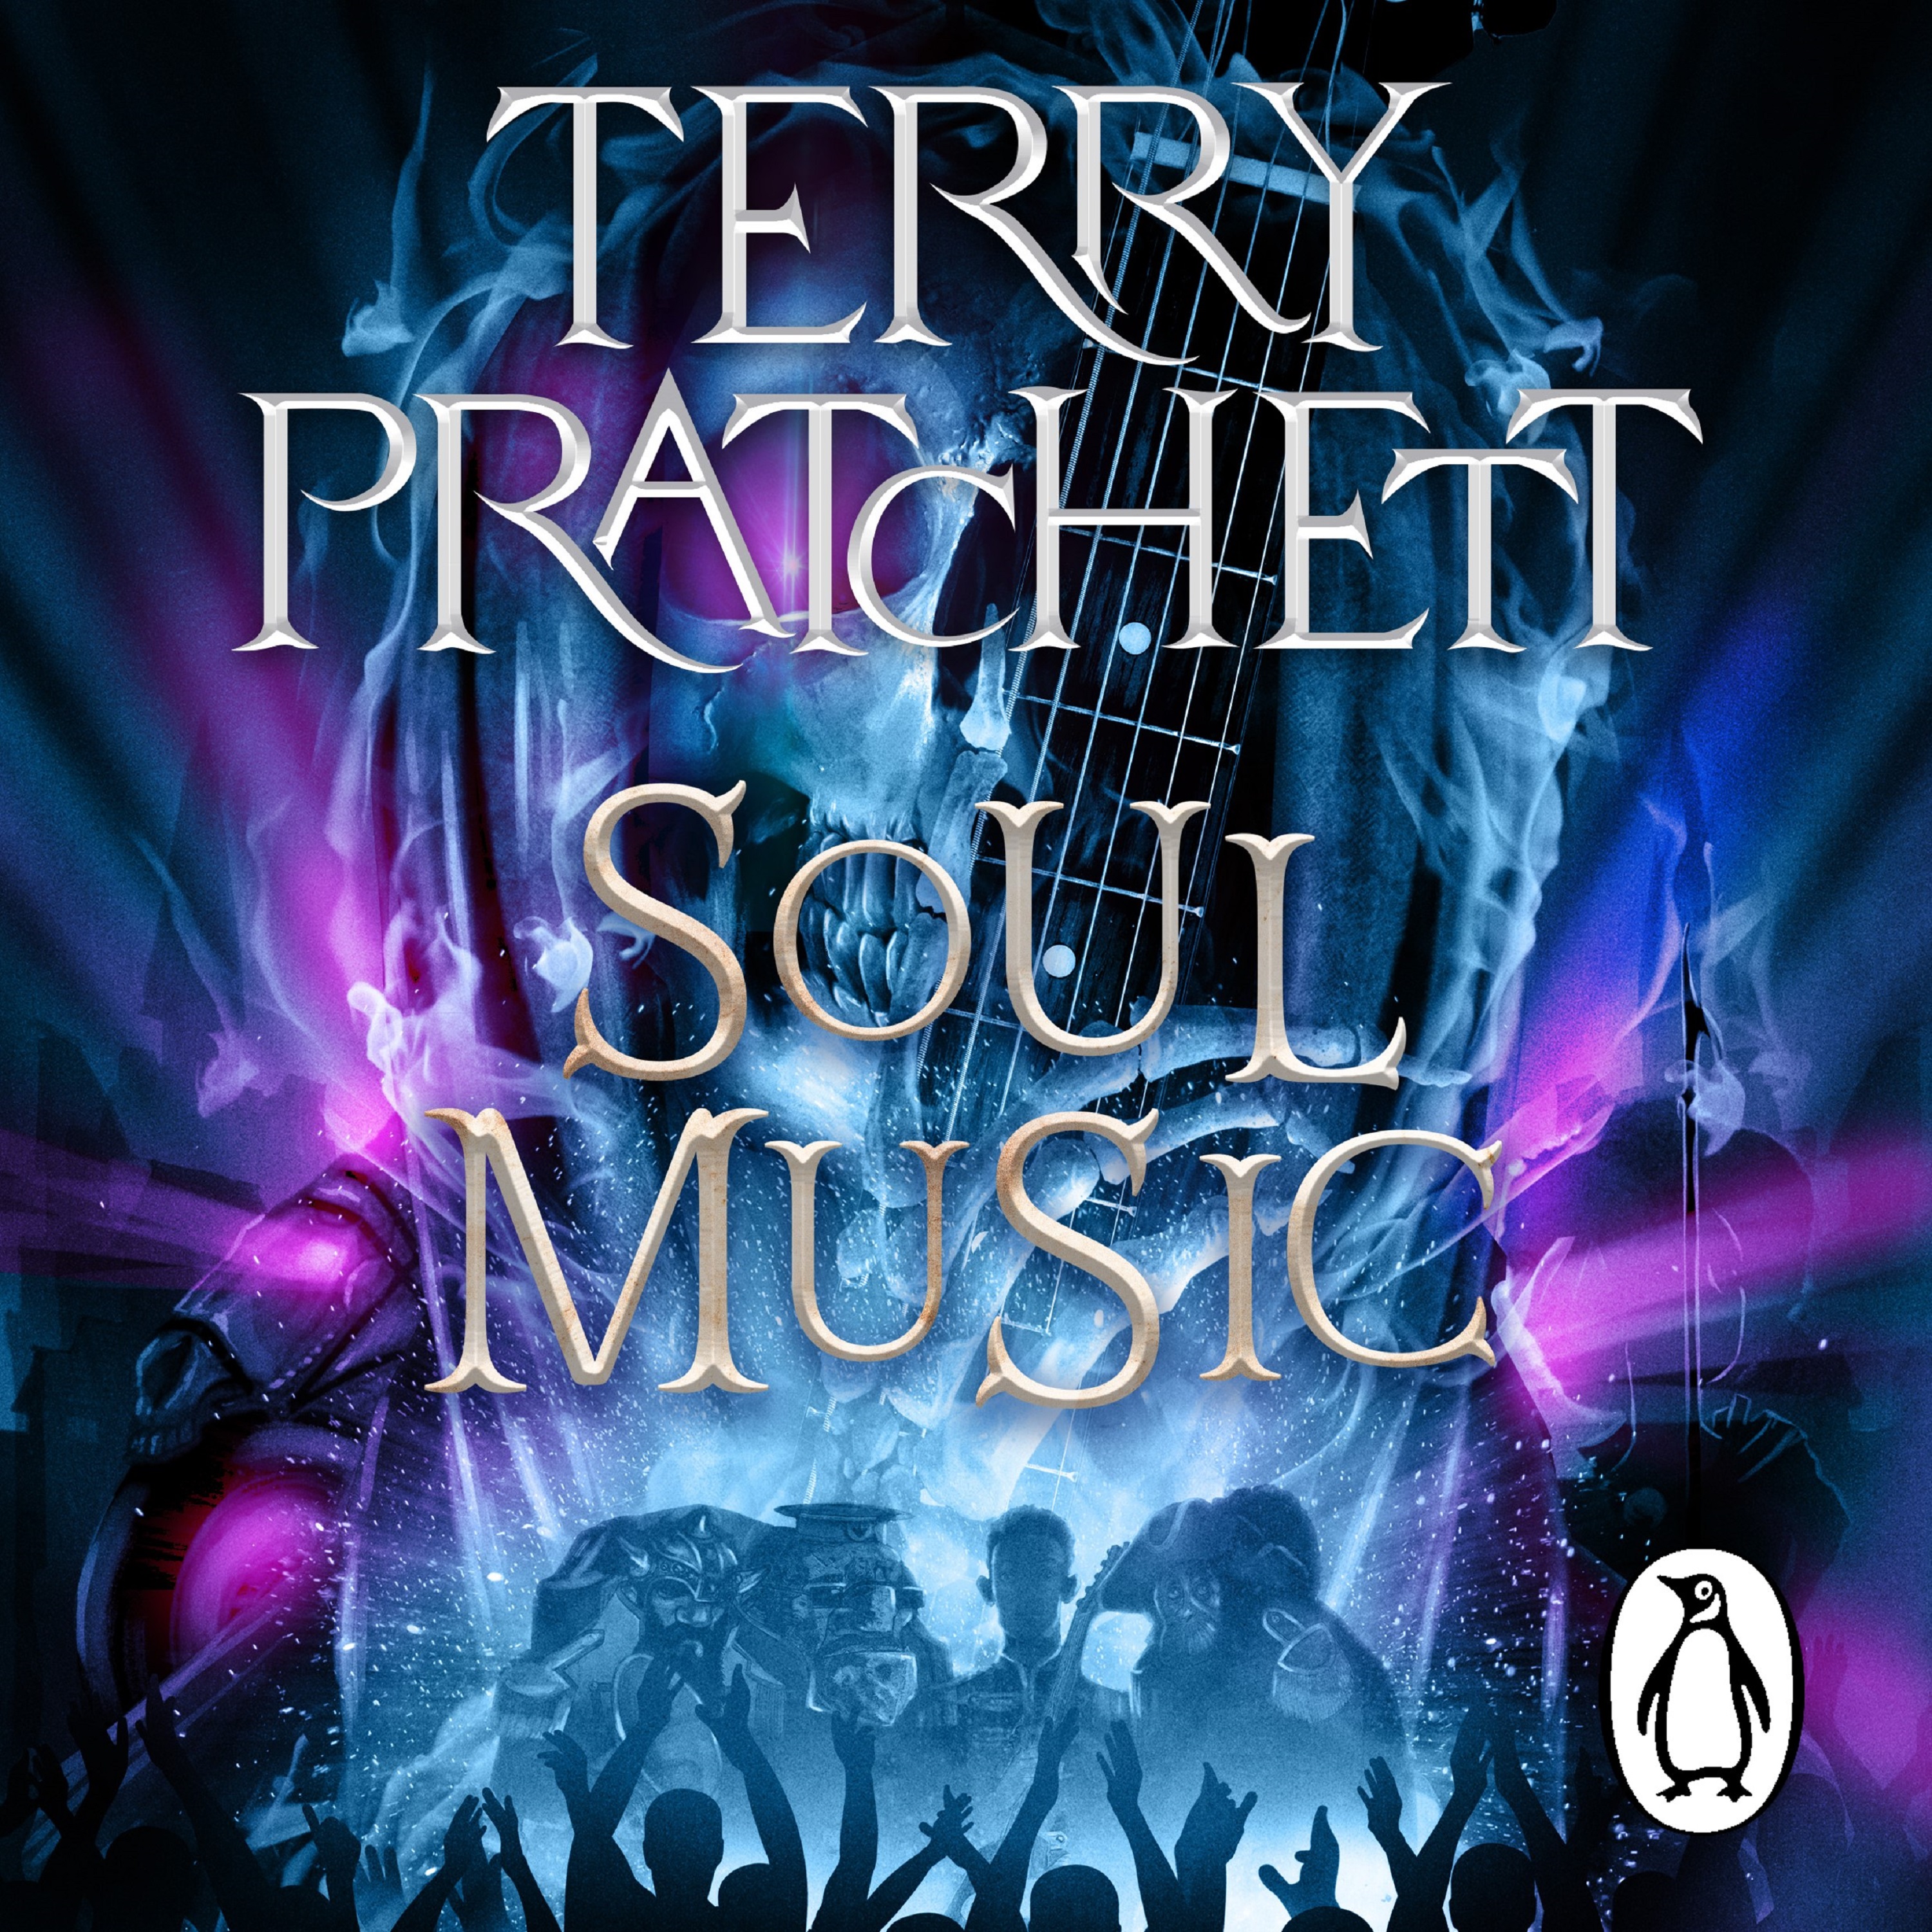 Audiobook image for Soul Music: A blue colour palette; Death's face, with a guitar fret board held in front of him, is in the background. At the bottom is a silhouette of a cheering crowd. Terry Pratchett's name and the title are in large silver font across the centre.